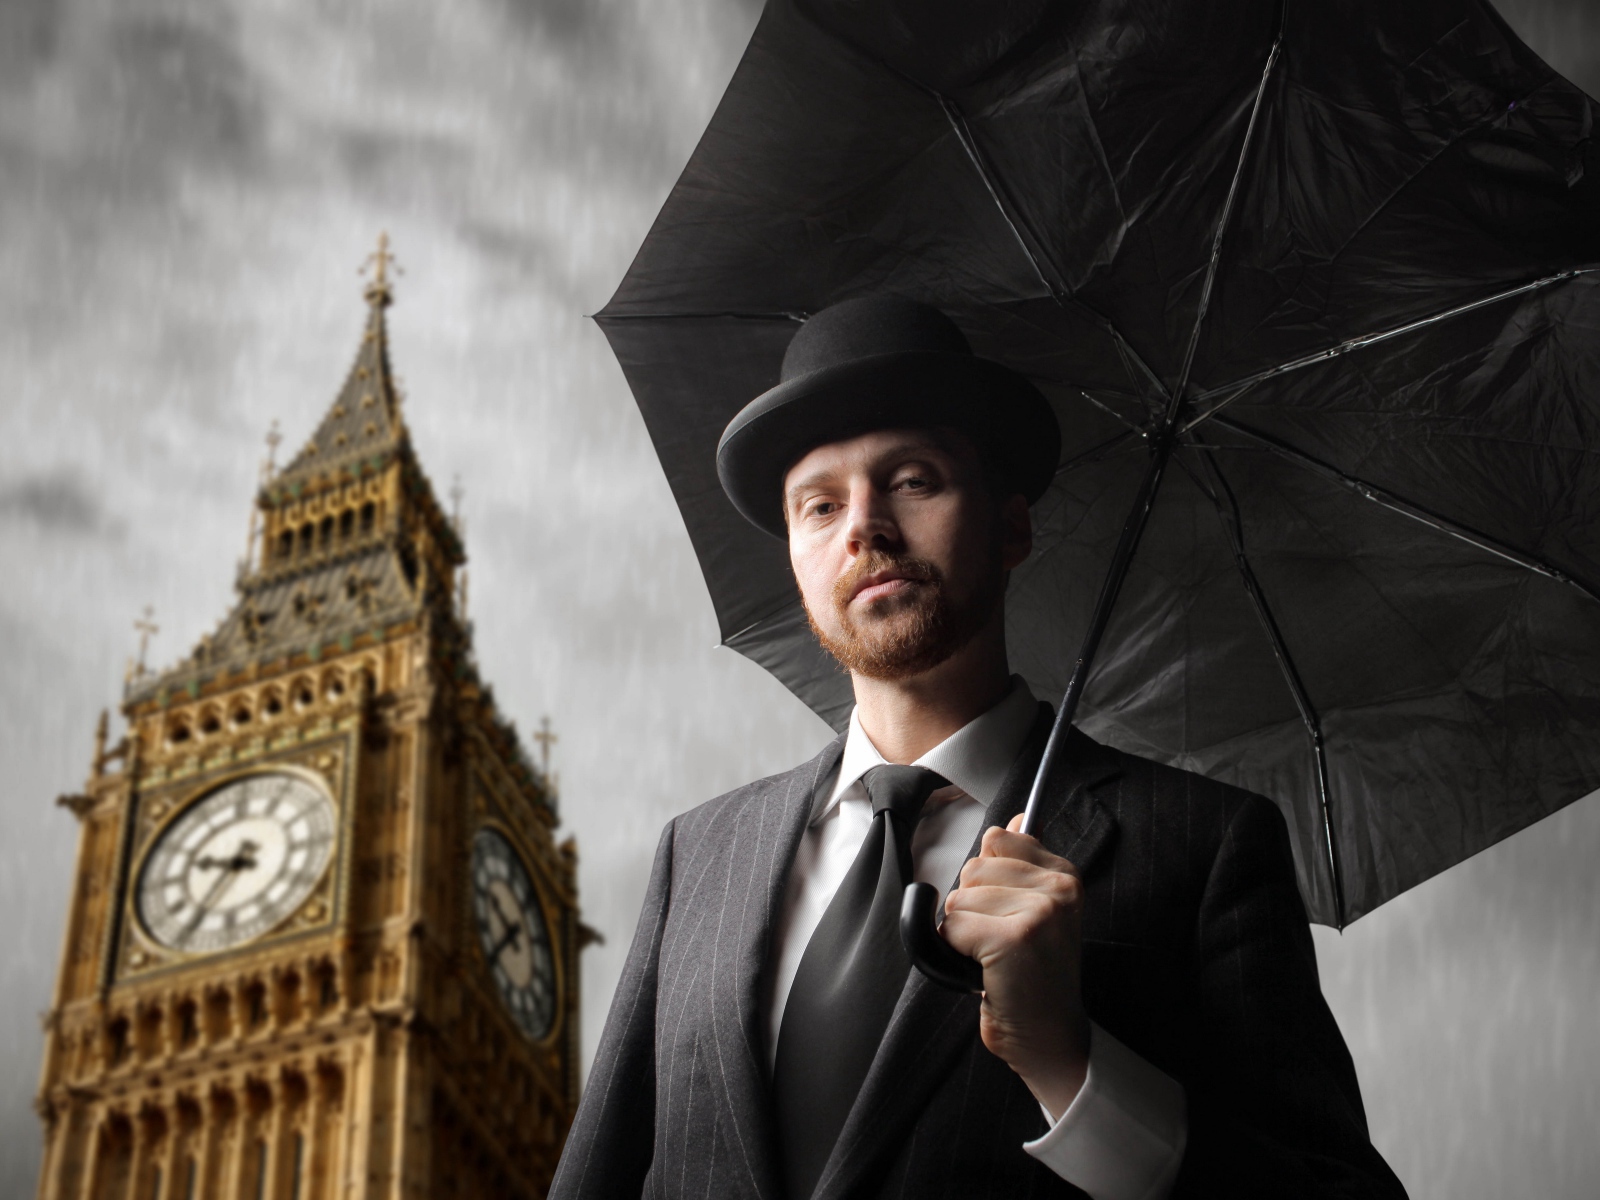 A man in a suit with a black umbrella at the tower with a clock